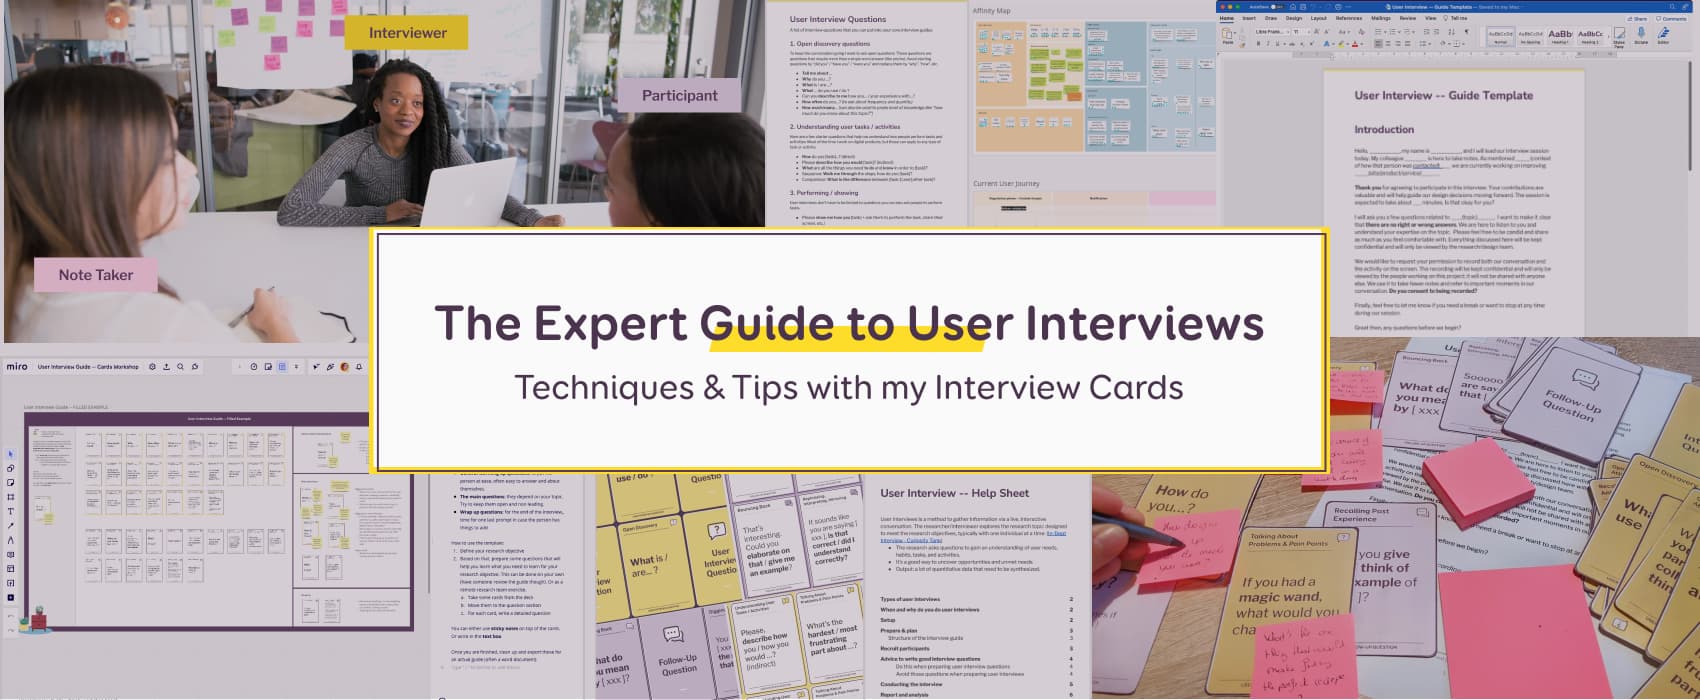 My Expert Guide to User Interviews